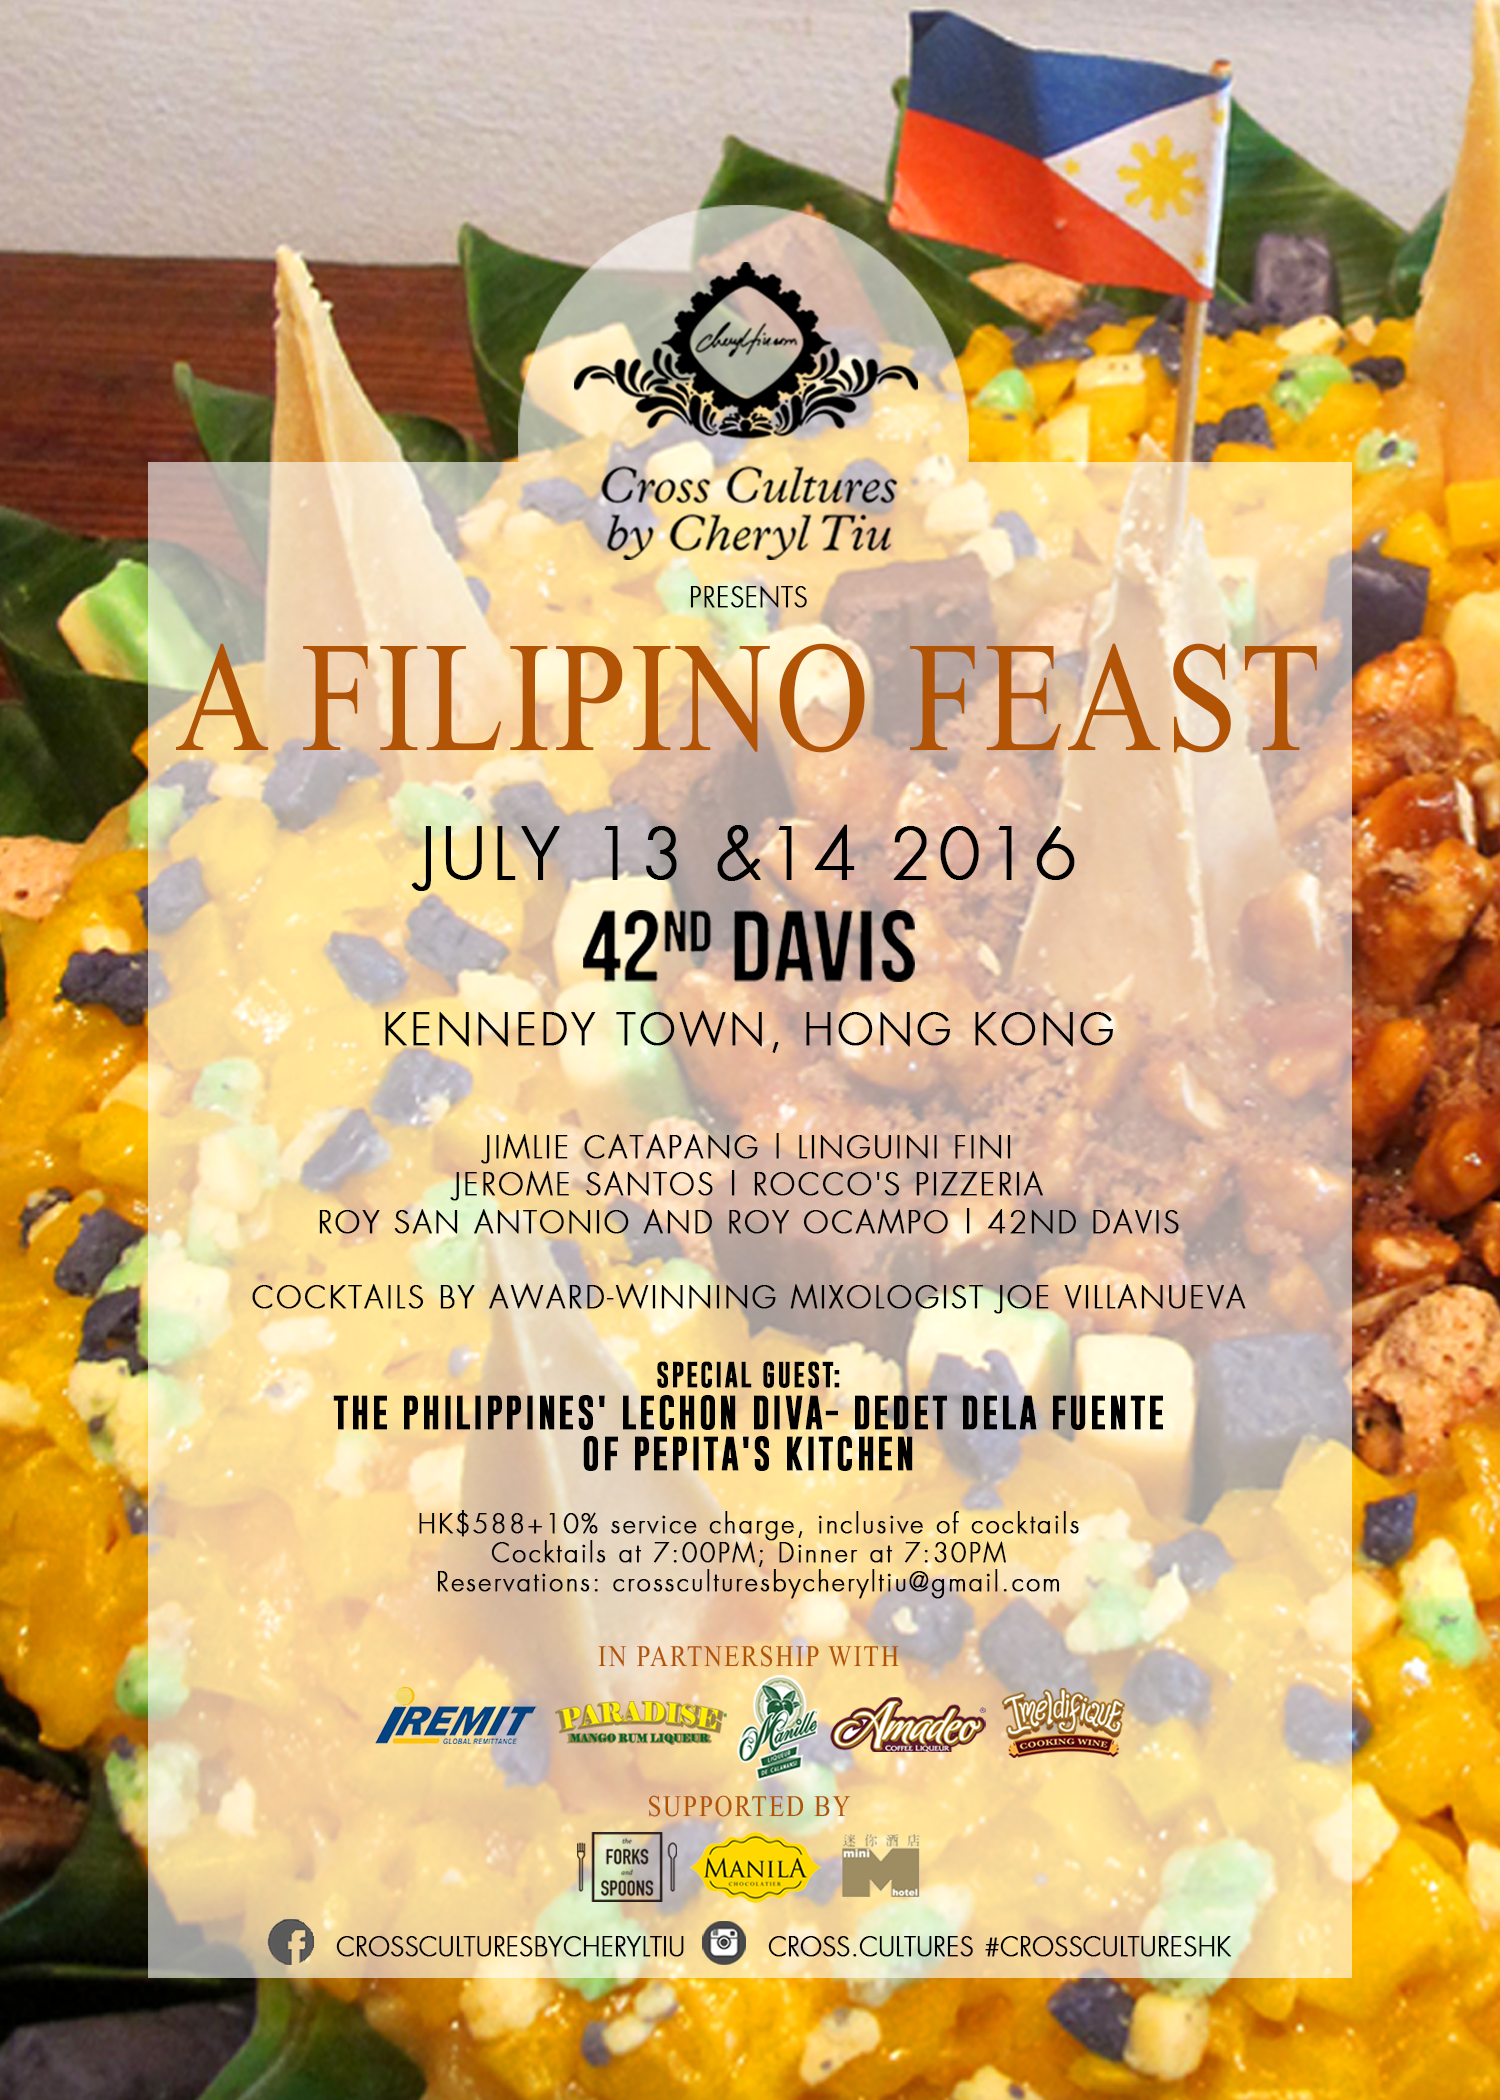 We Are Bringing Filipino Food To Hong Kong on July 13 & 14– Our First Cross Cultures Event Overseas!